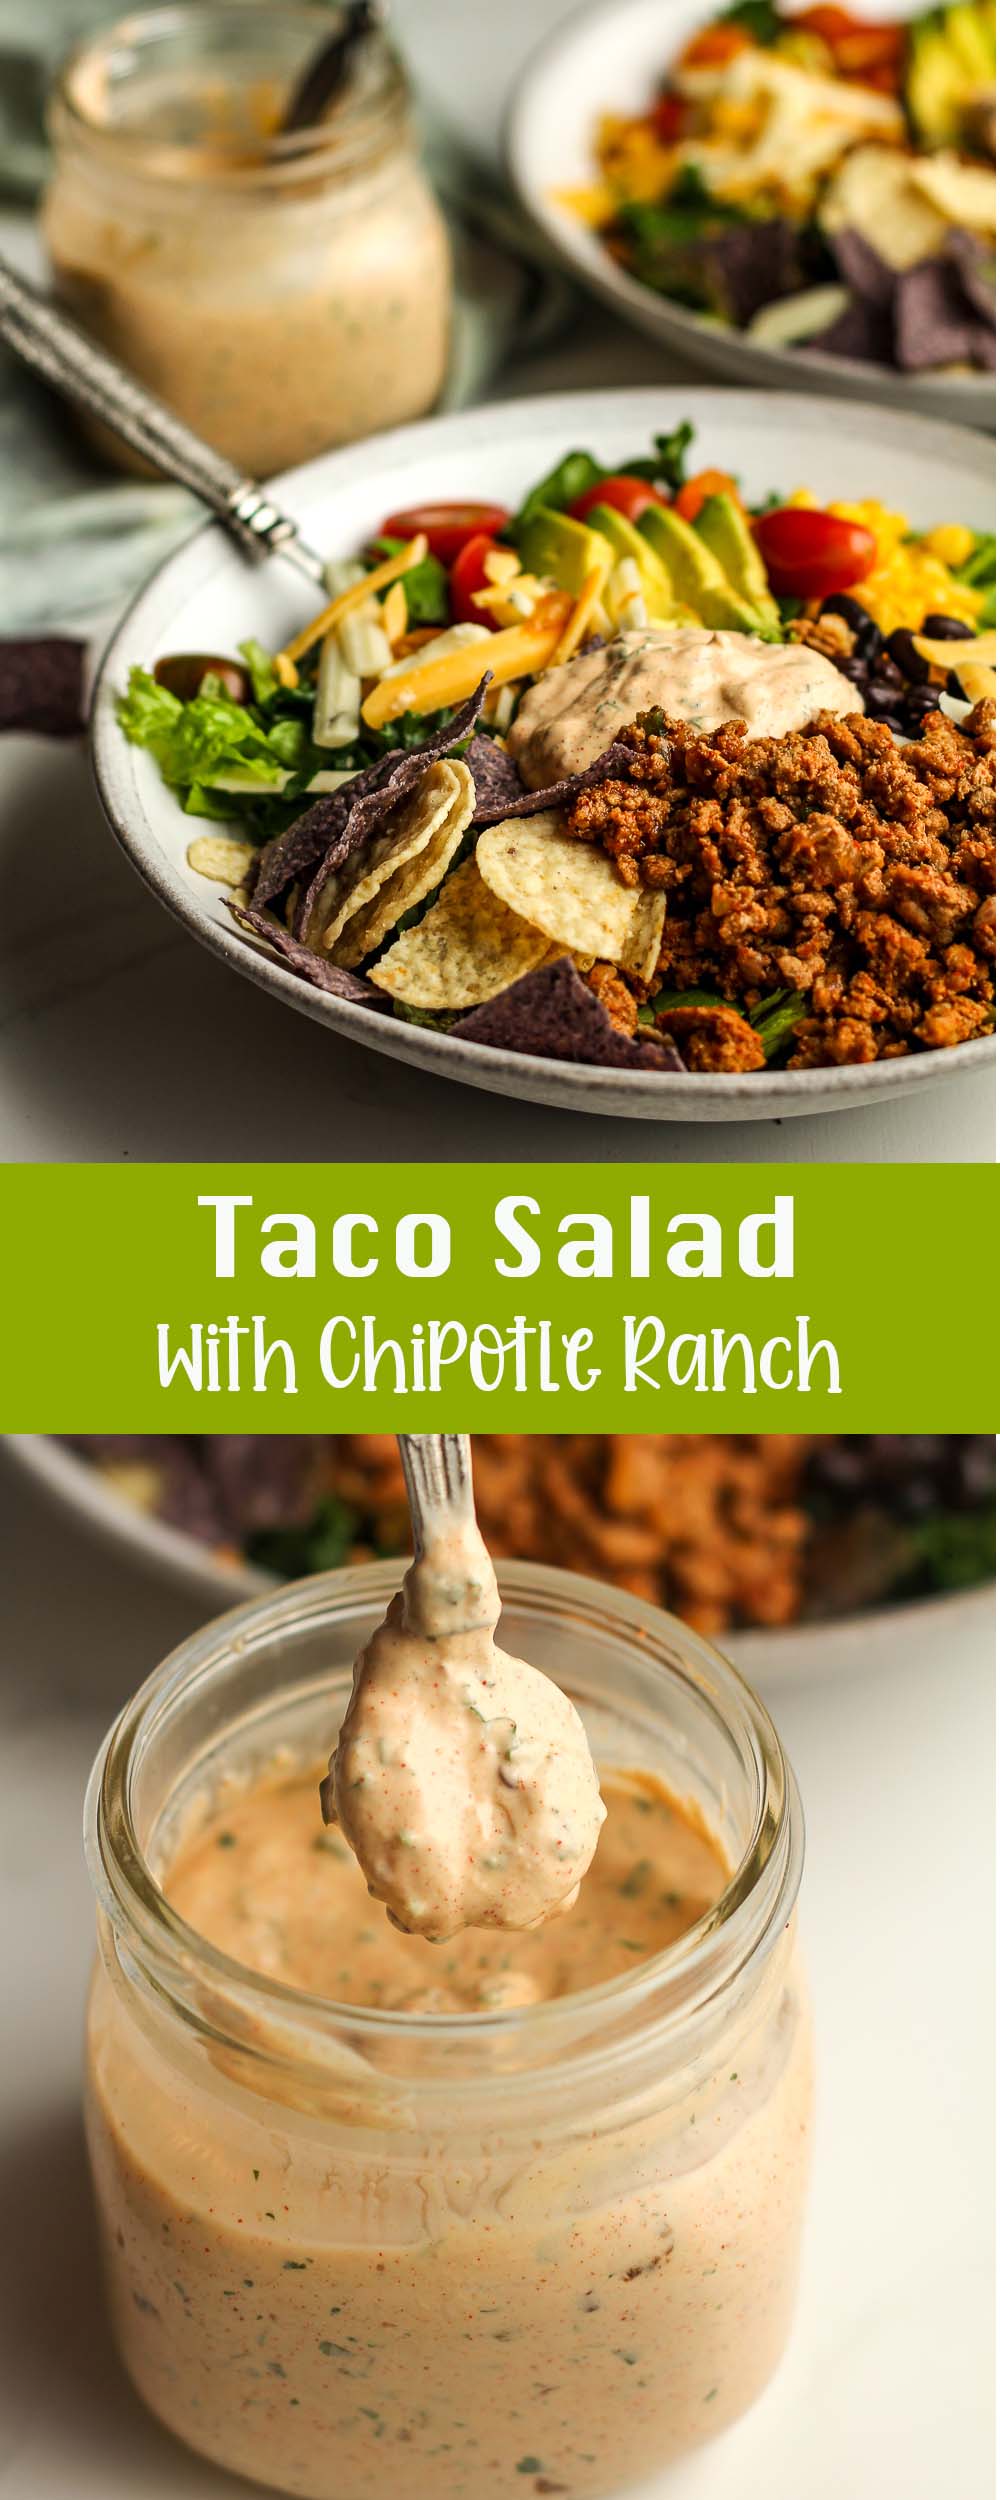 Two photos of Taco Salad with Chipotle Ranch